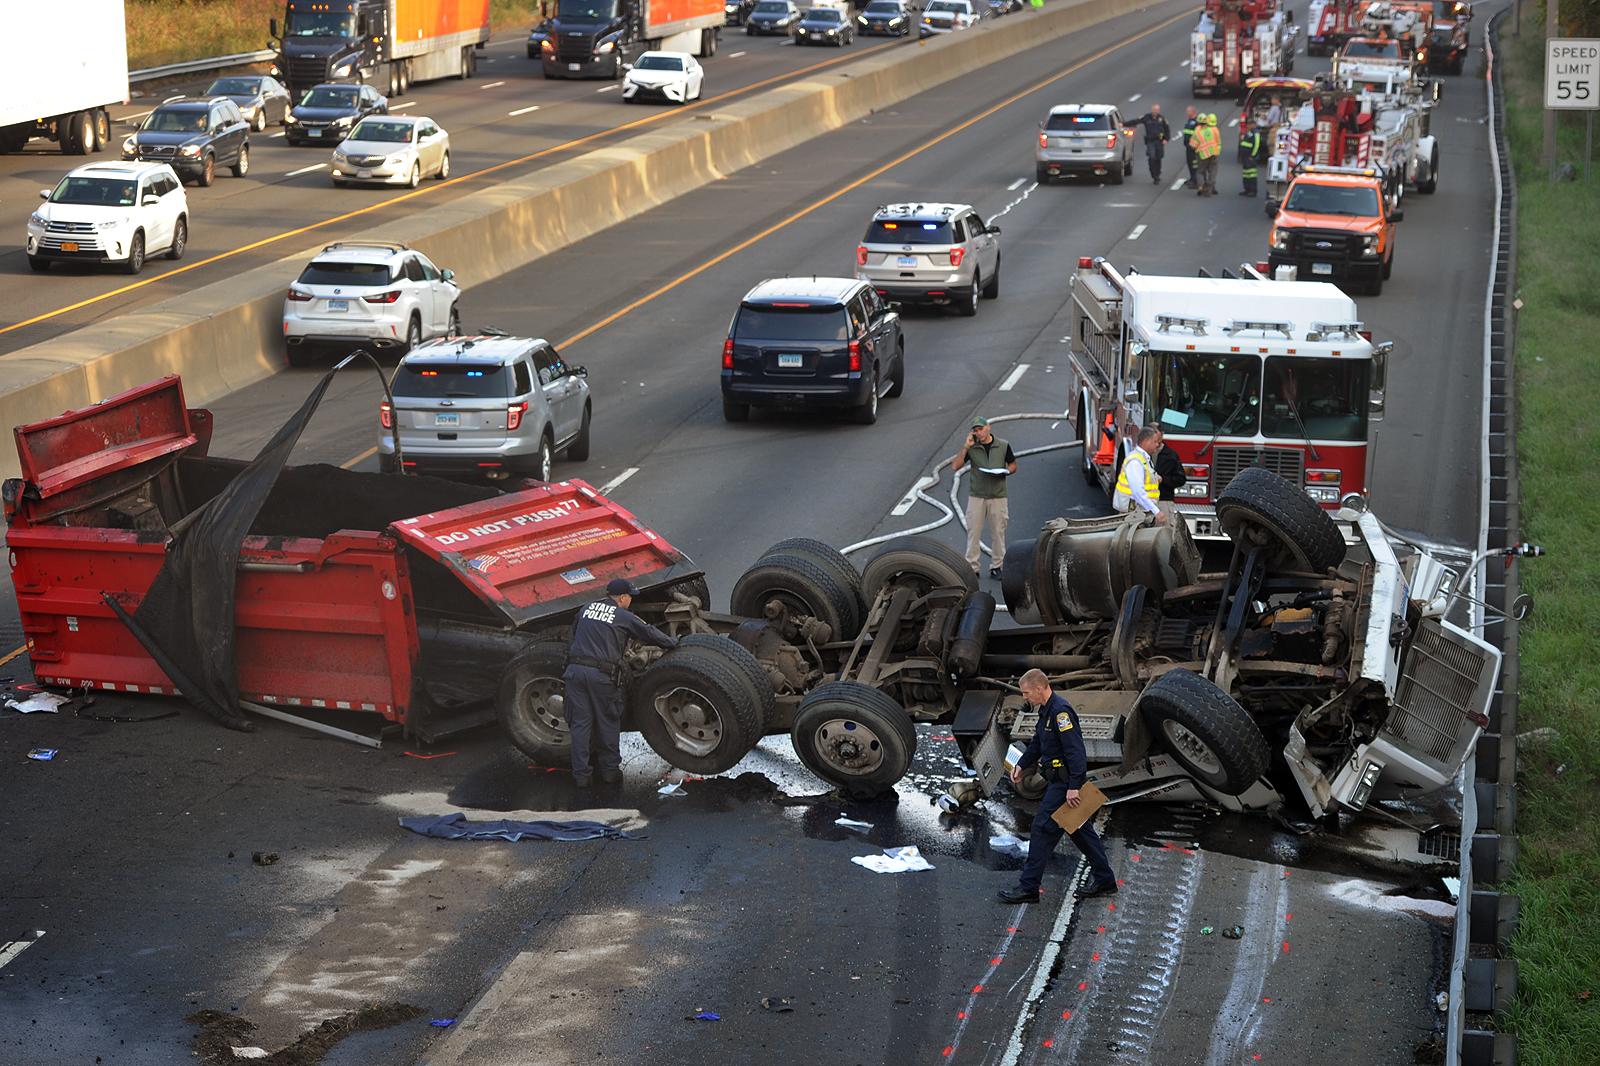 Fatal crash shut down I-95 in Milford for roughly 7 hours - Connecticut Post